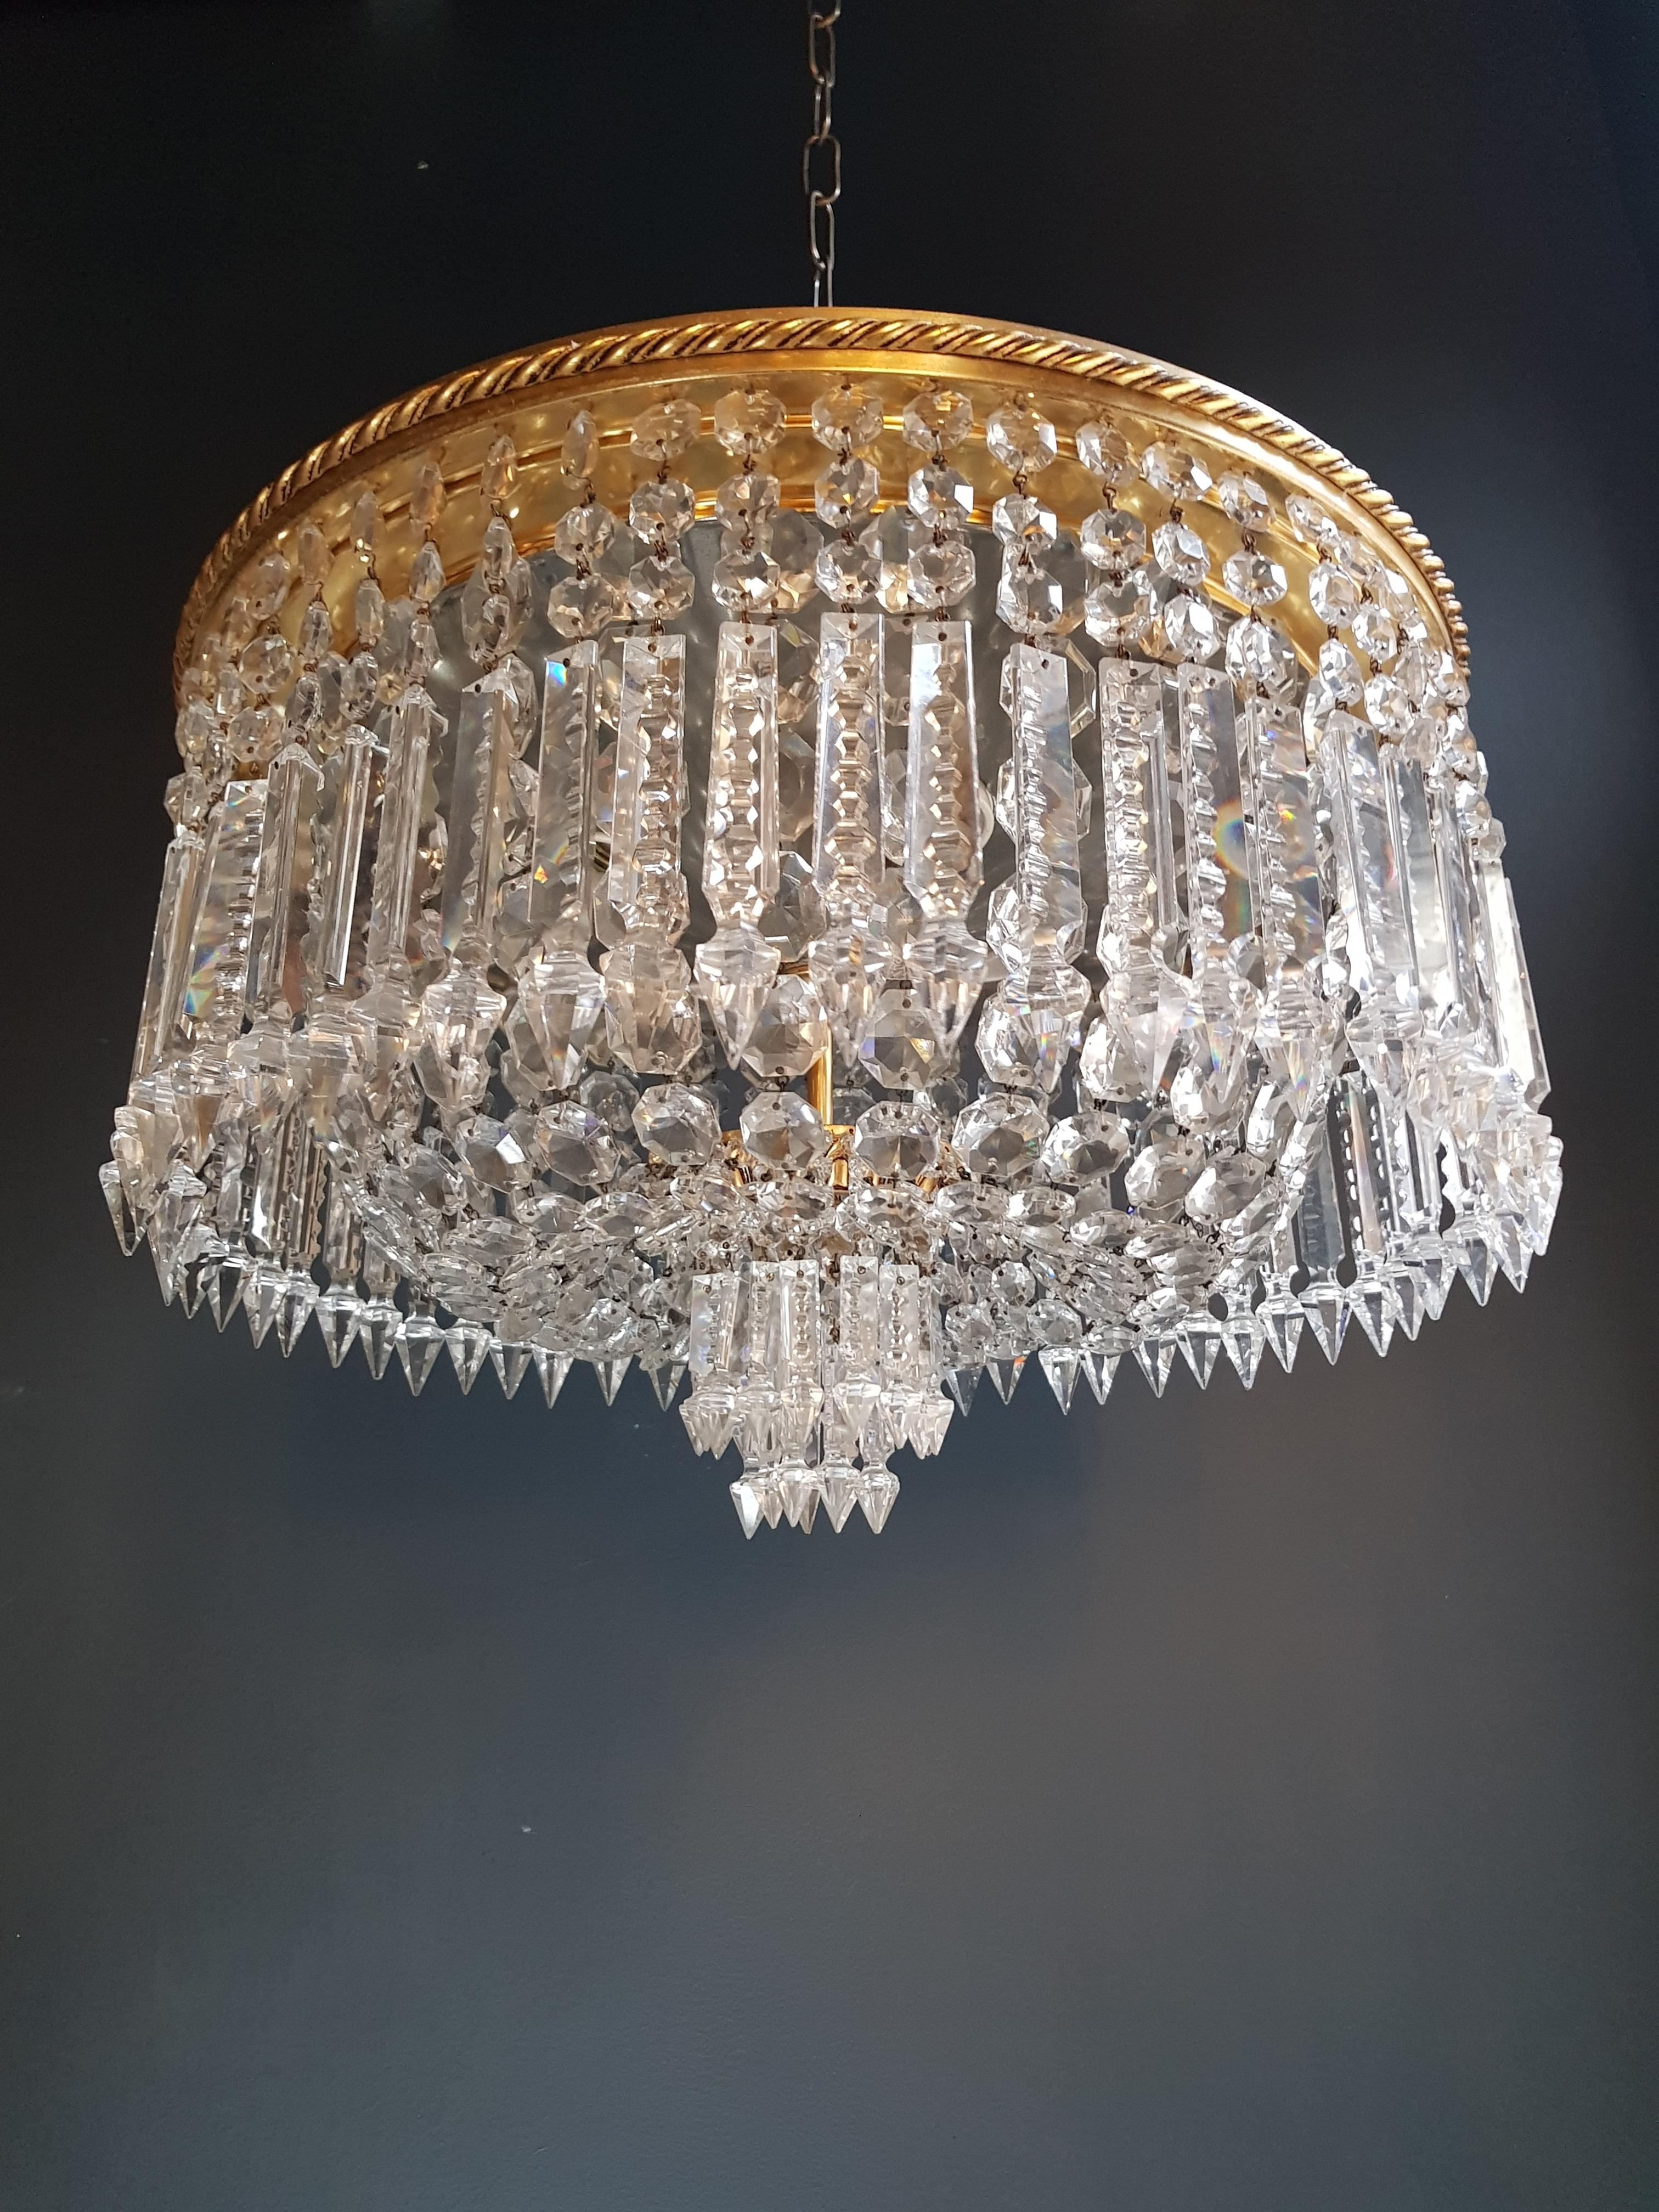 Low ceiling crystal chandelier brass.
Cabling completely renewed. Crystal hand knotted.
Measures: Total height 33 cm, height without chain 33 cm, diameter 50 cm. weight (approximately) 9kg.

Number of lights: 4-light bulb sockets: E27
Brass